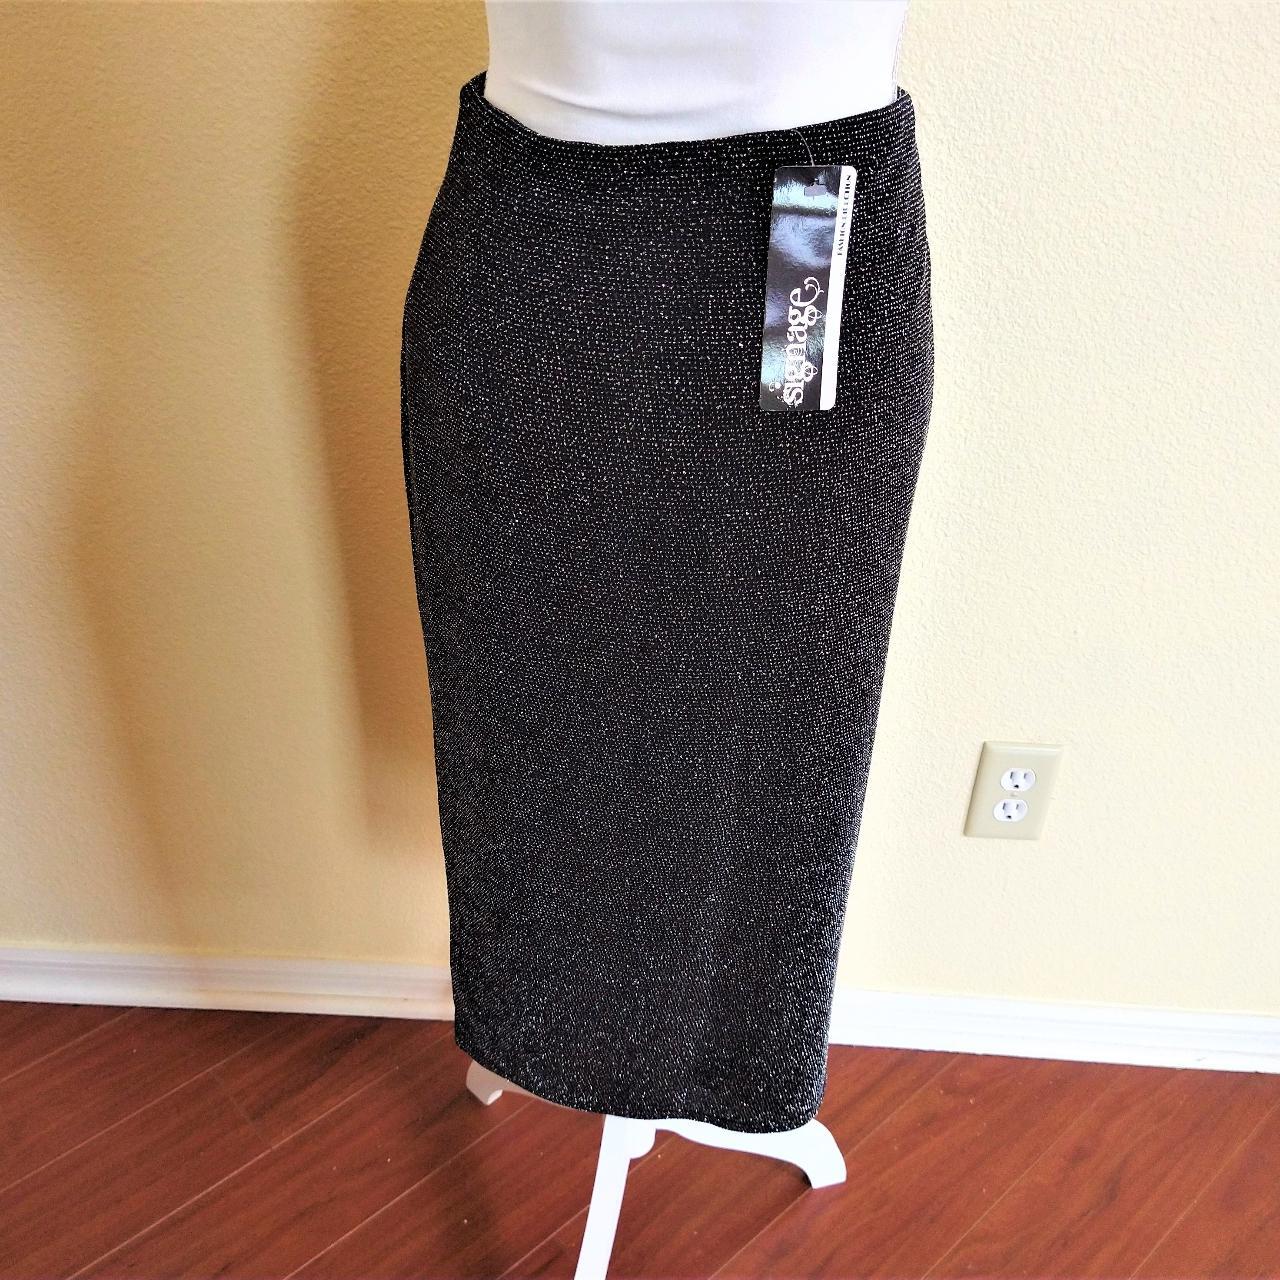 Product Image 4 - Black and Silver Glitter Skirt

Brand